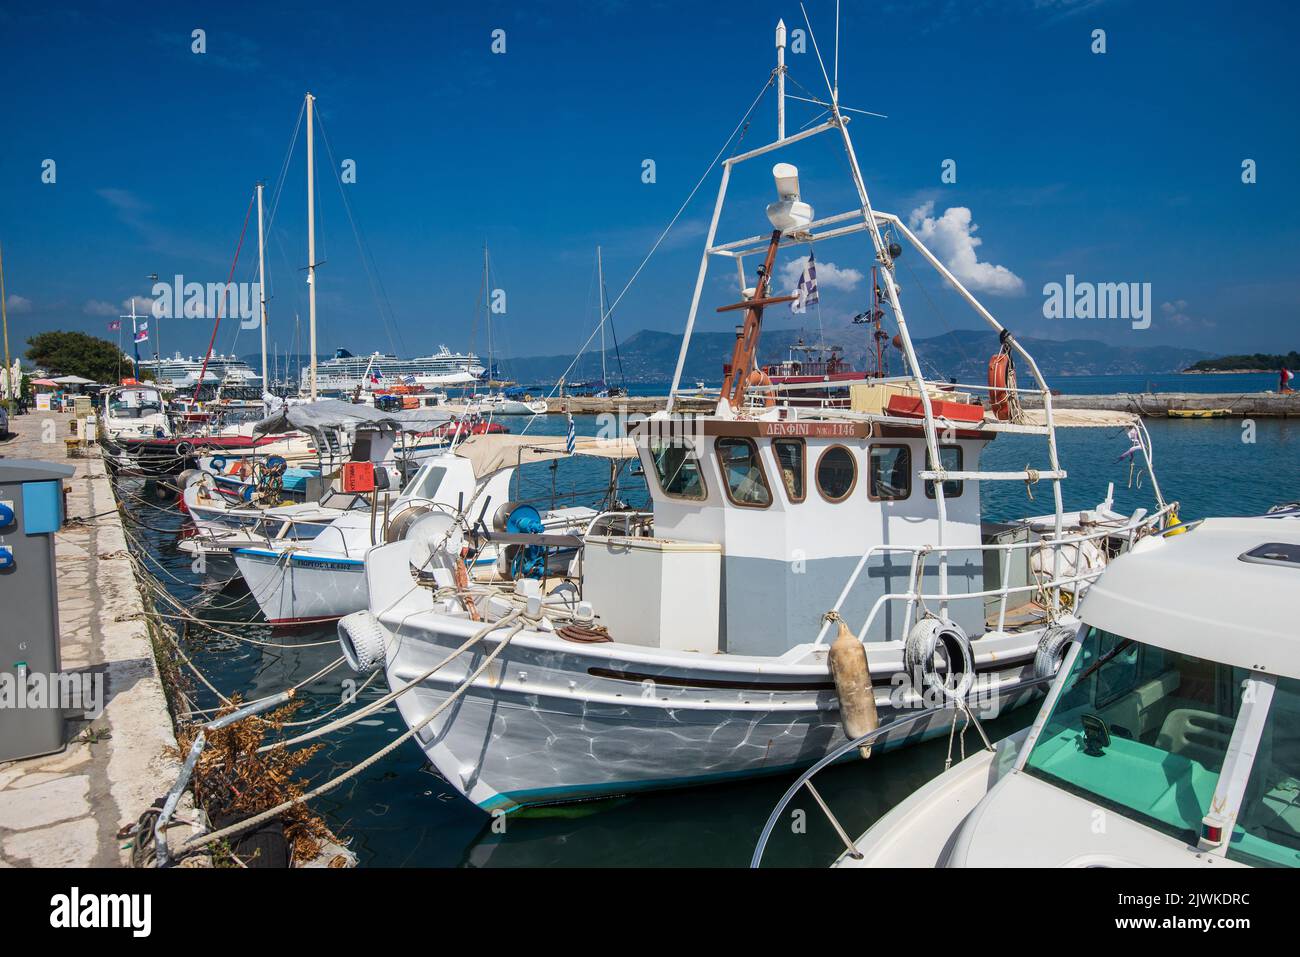 Fishing boats moored in the Old Port of Corfu Stock Photo